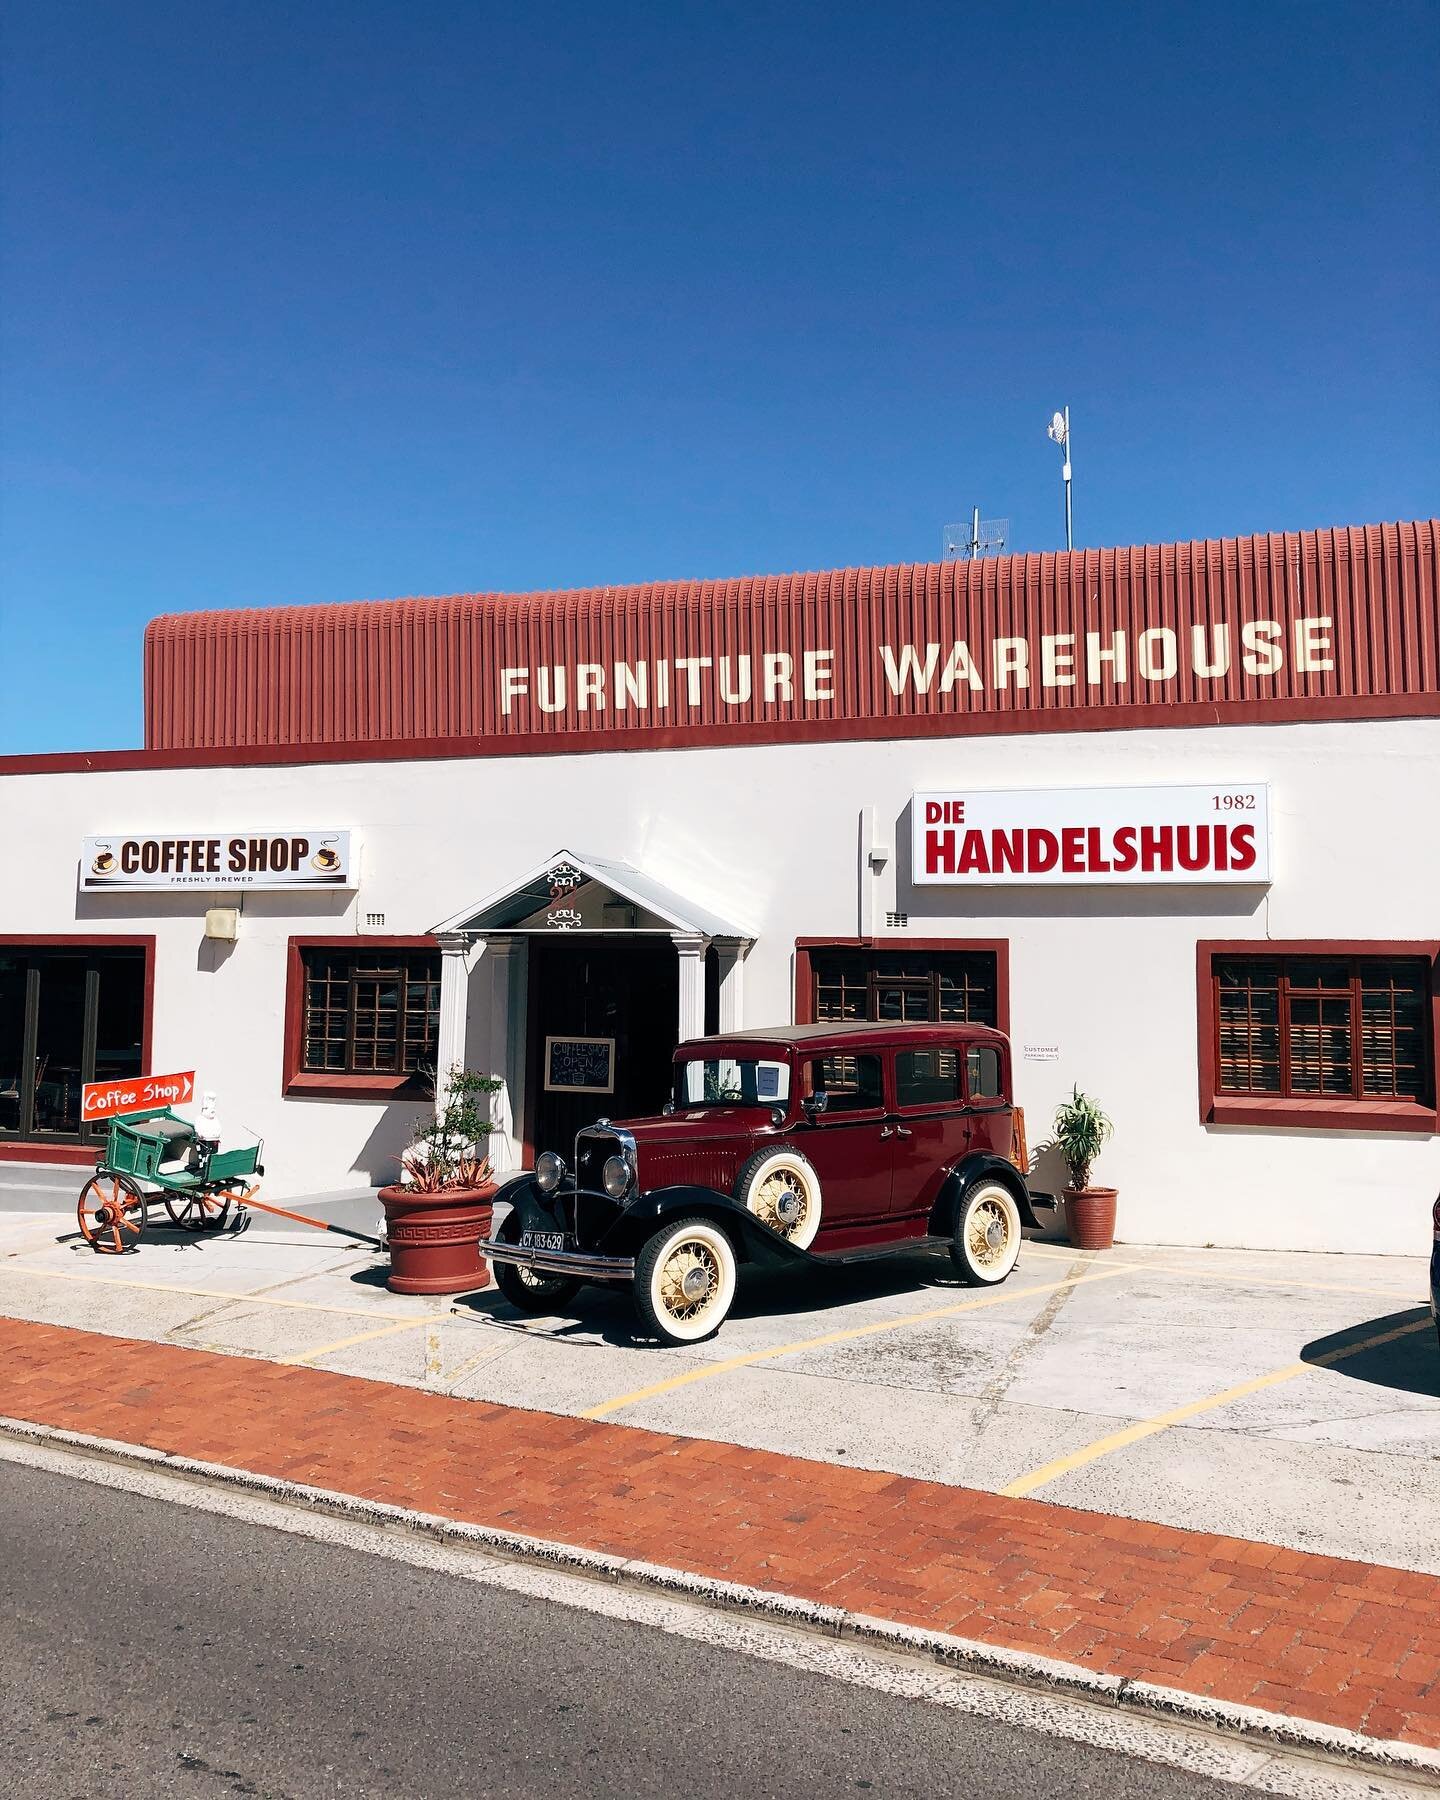 Established in 1982, Die Handelshuis is proudly family owned &amp; operated. We specialise in good quality, second-hand &amp; antique furniture and cars. We really have something for everyone 😁👌

Stop by for a browse &amp; a coffee, we&rsquo;re ope